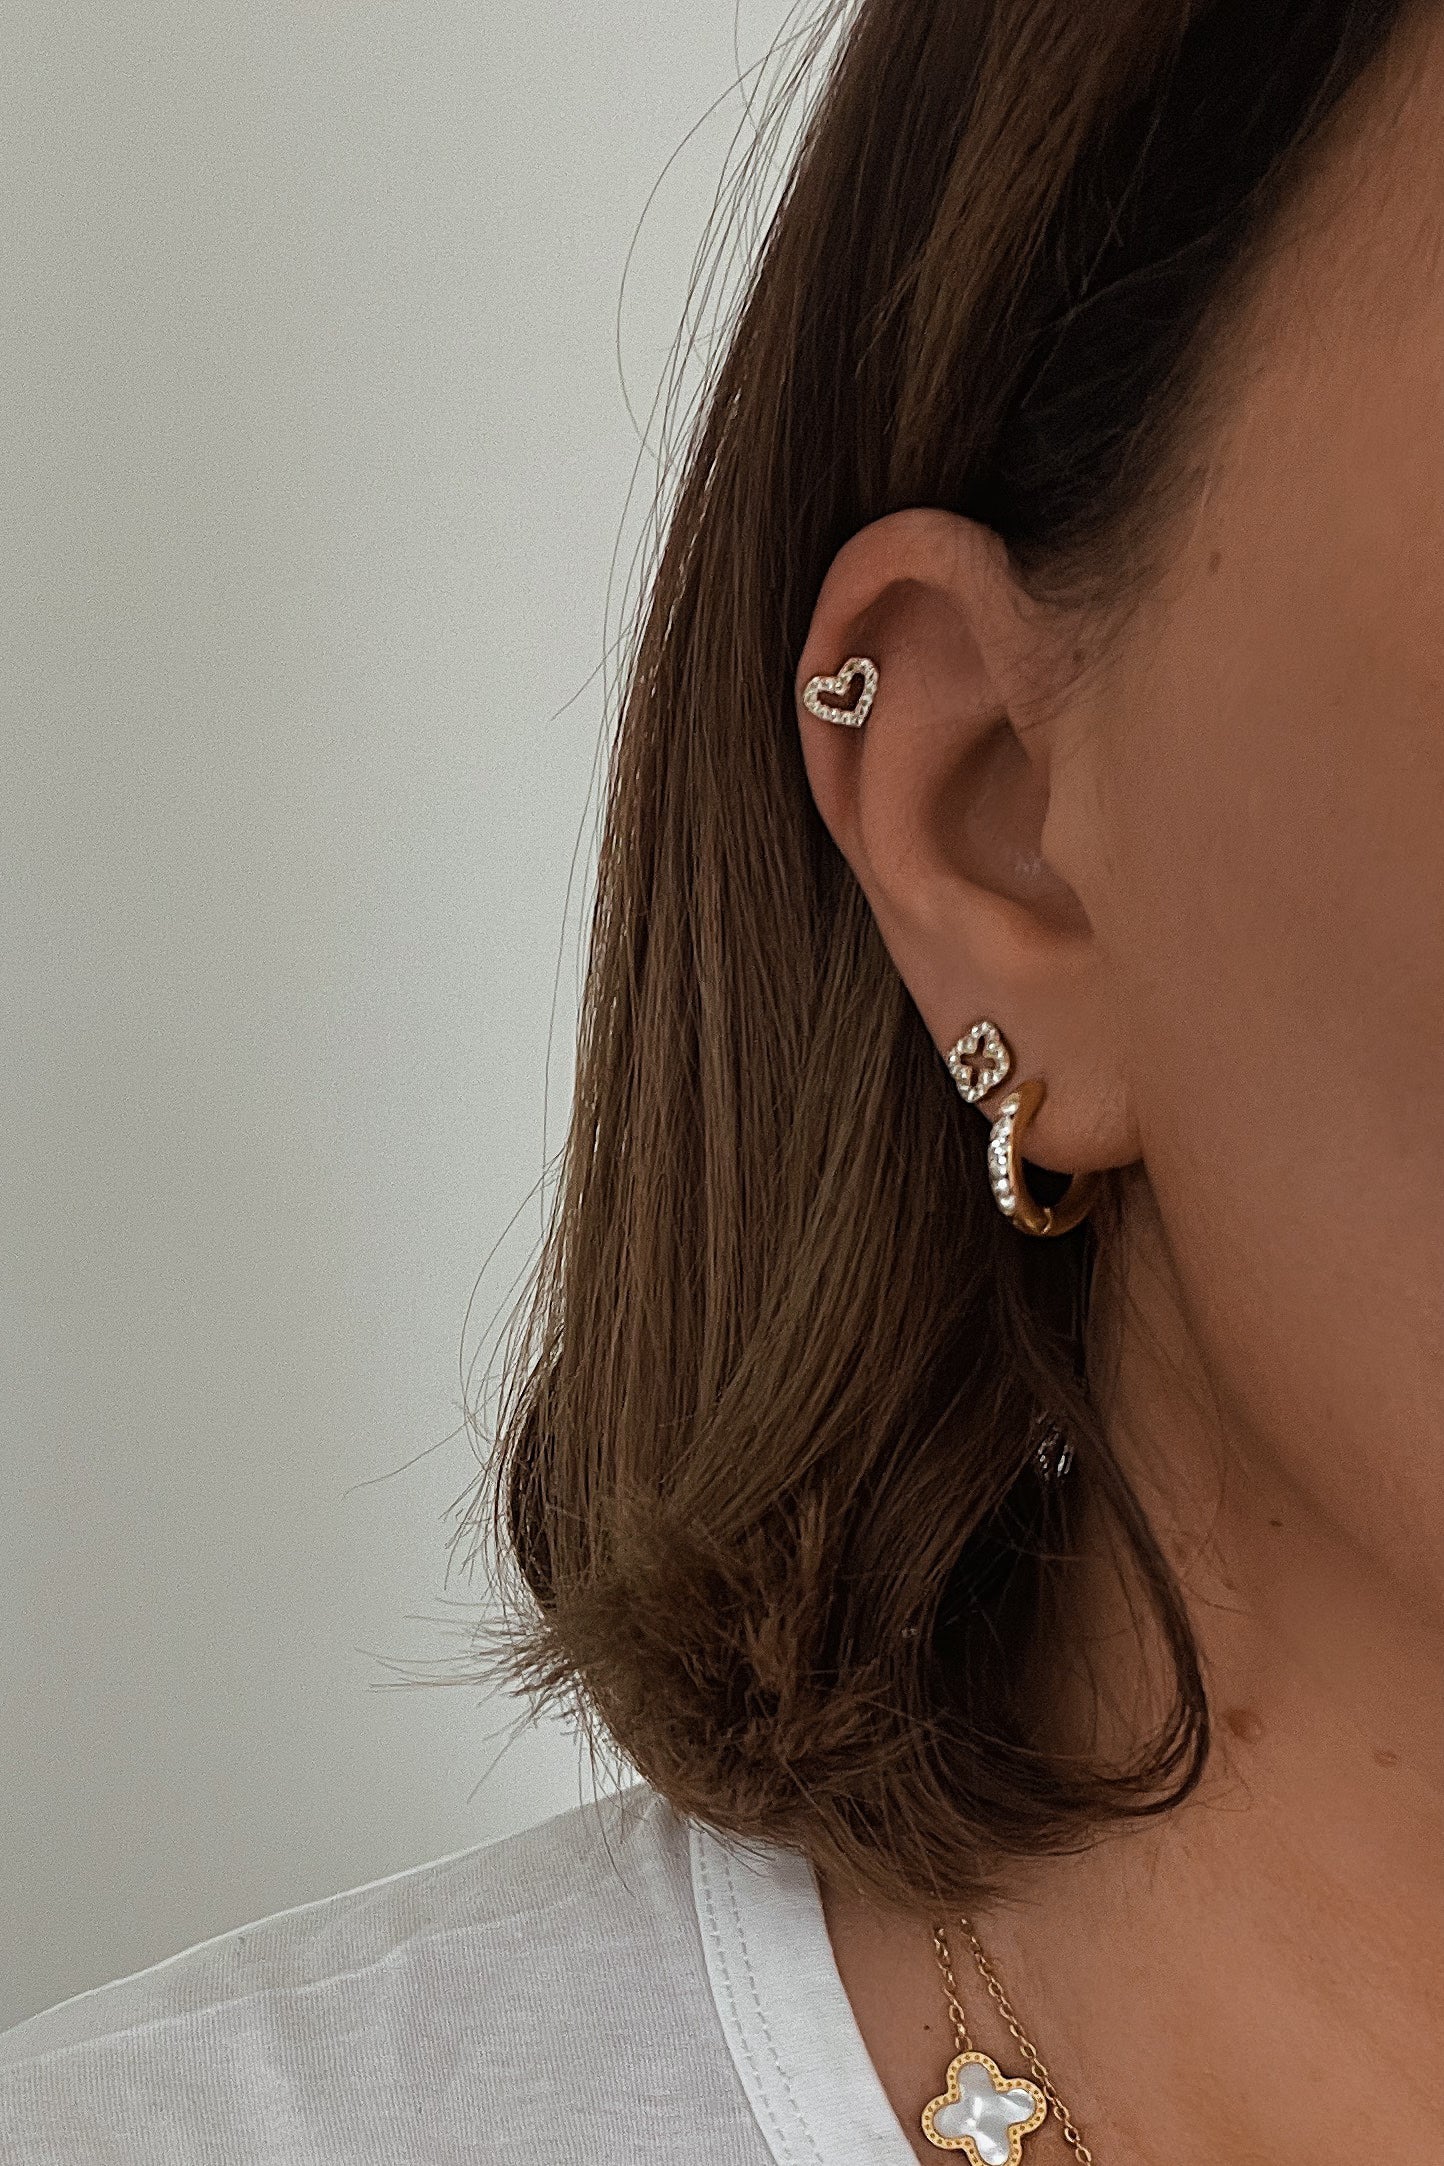 Mimi Studs - Boutique Minimaliste has waterproof, durable, elegant and vintage inspired jewelry